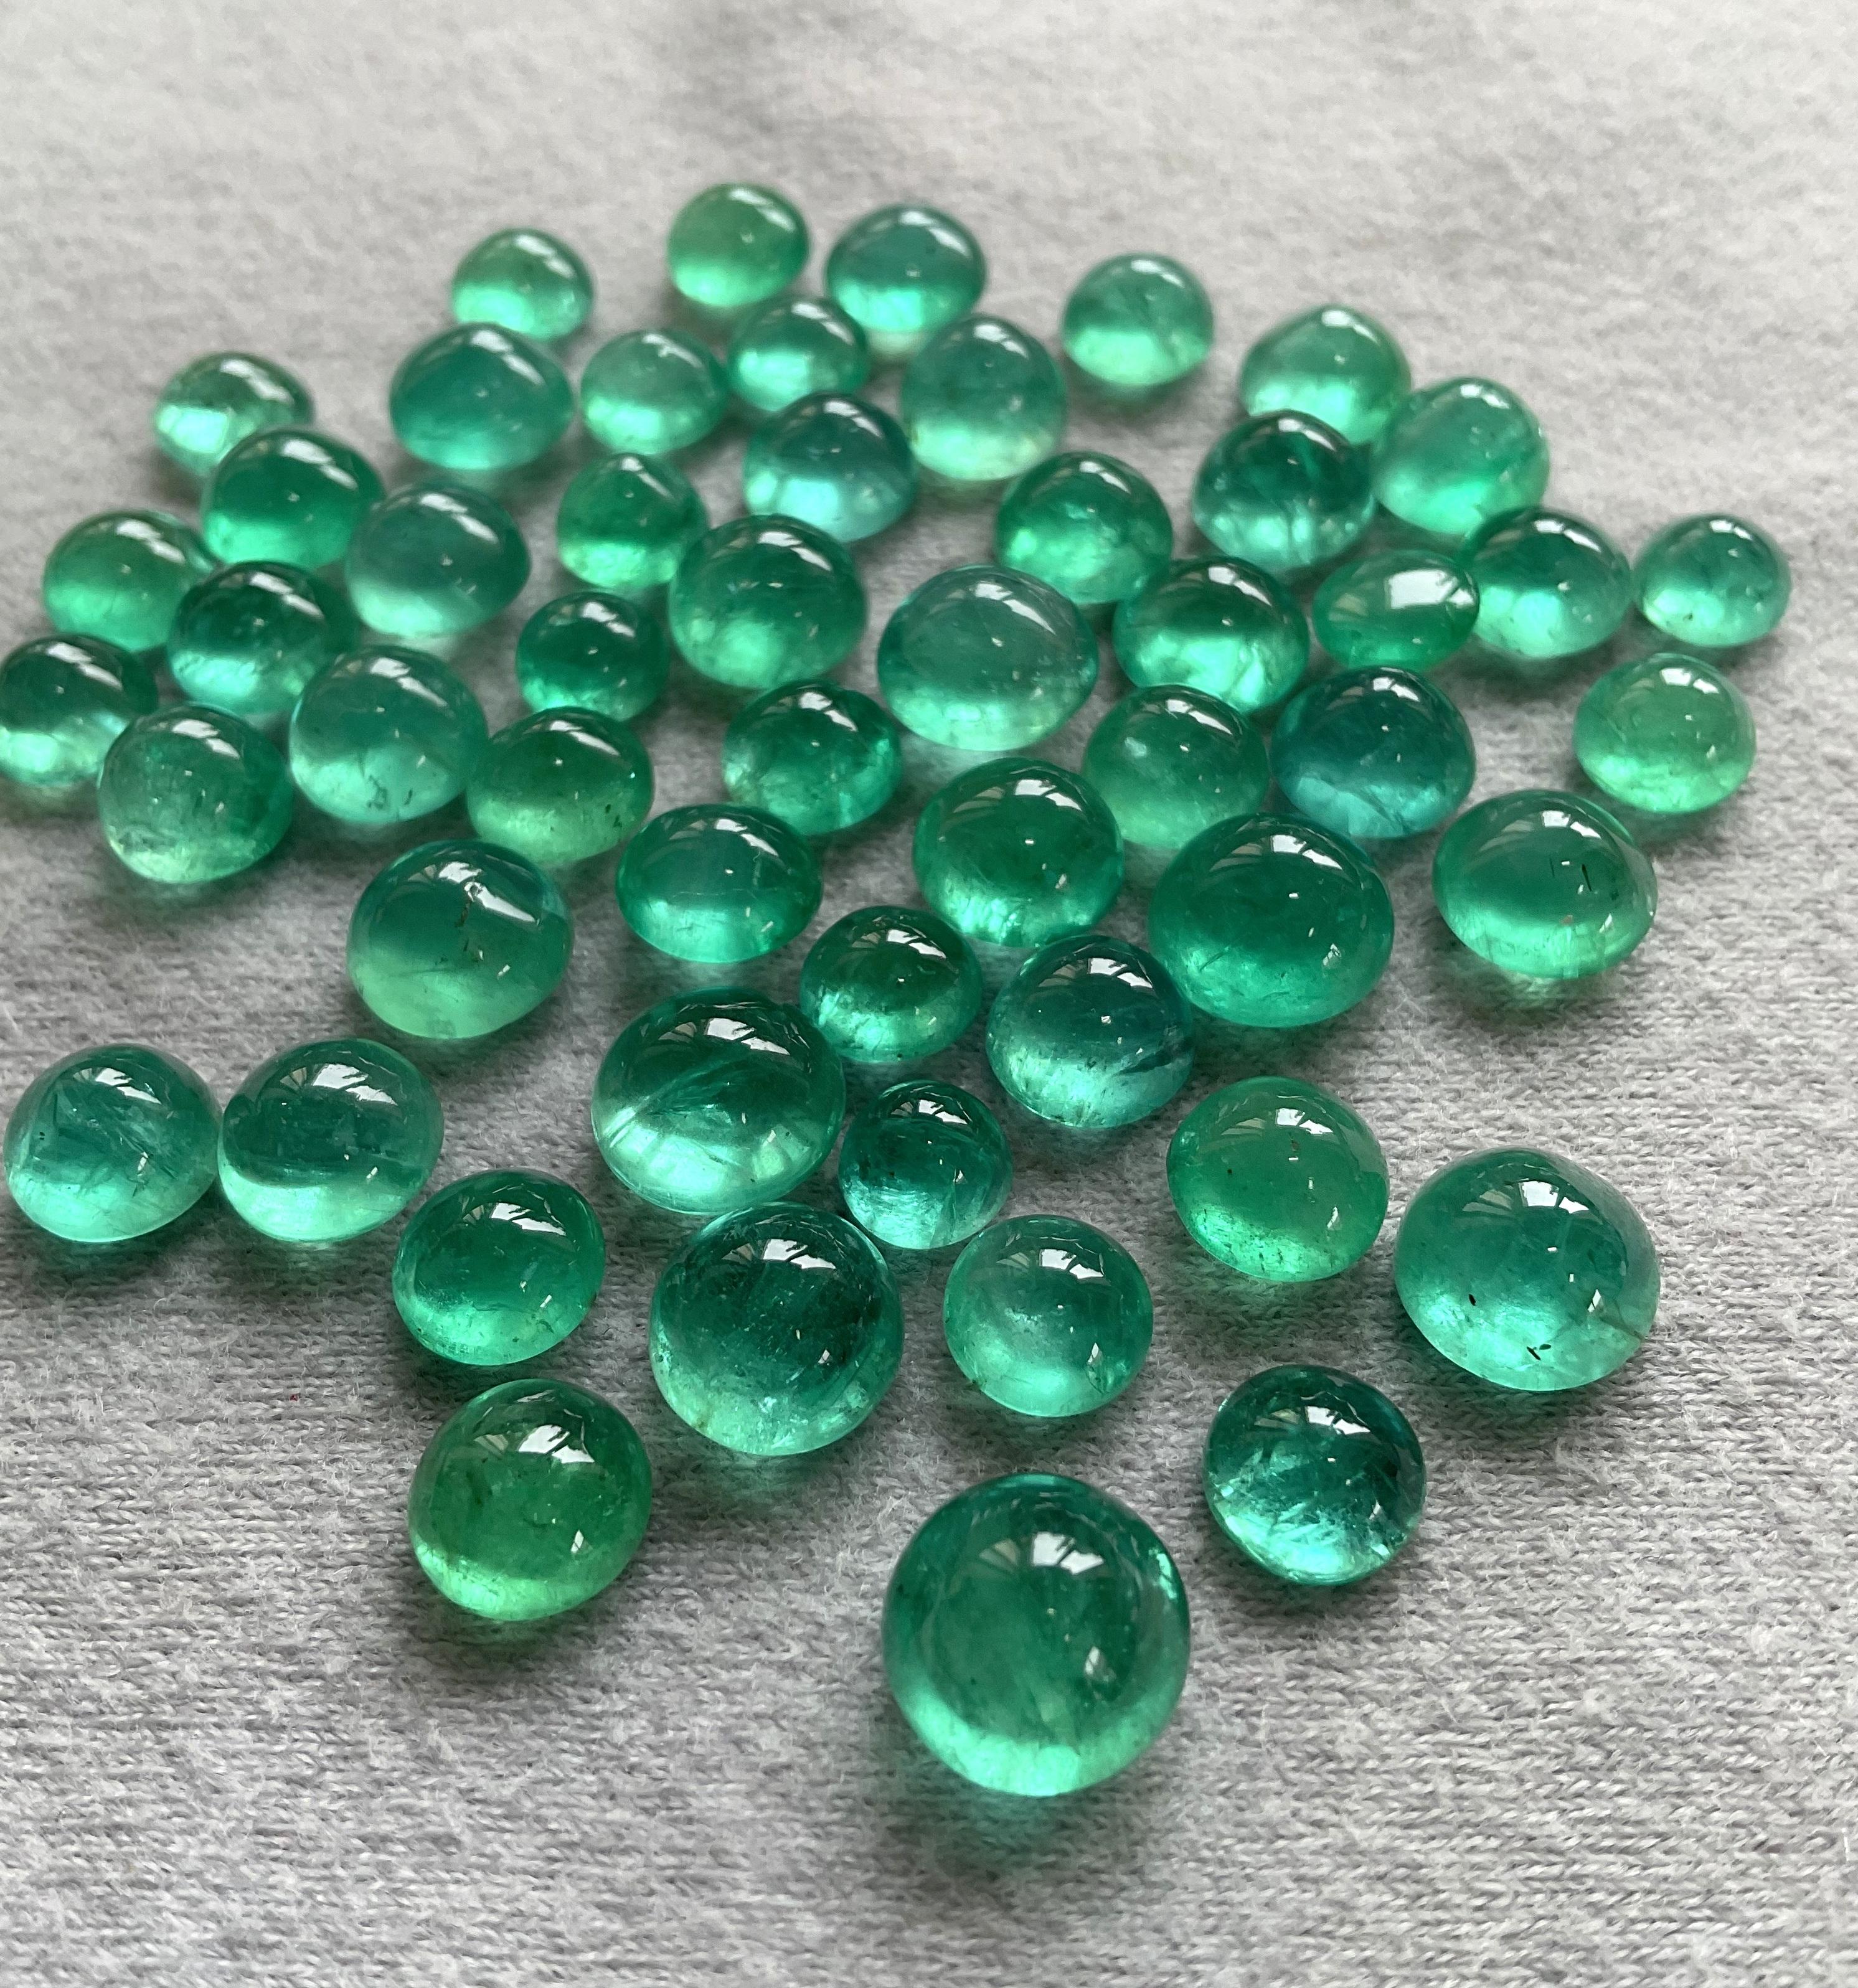 Taille ronde 111.00 carats Zambian Emerald Round Plain Cabs Top Quality For Jewelry Gemstone  en vente